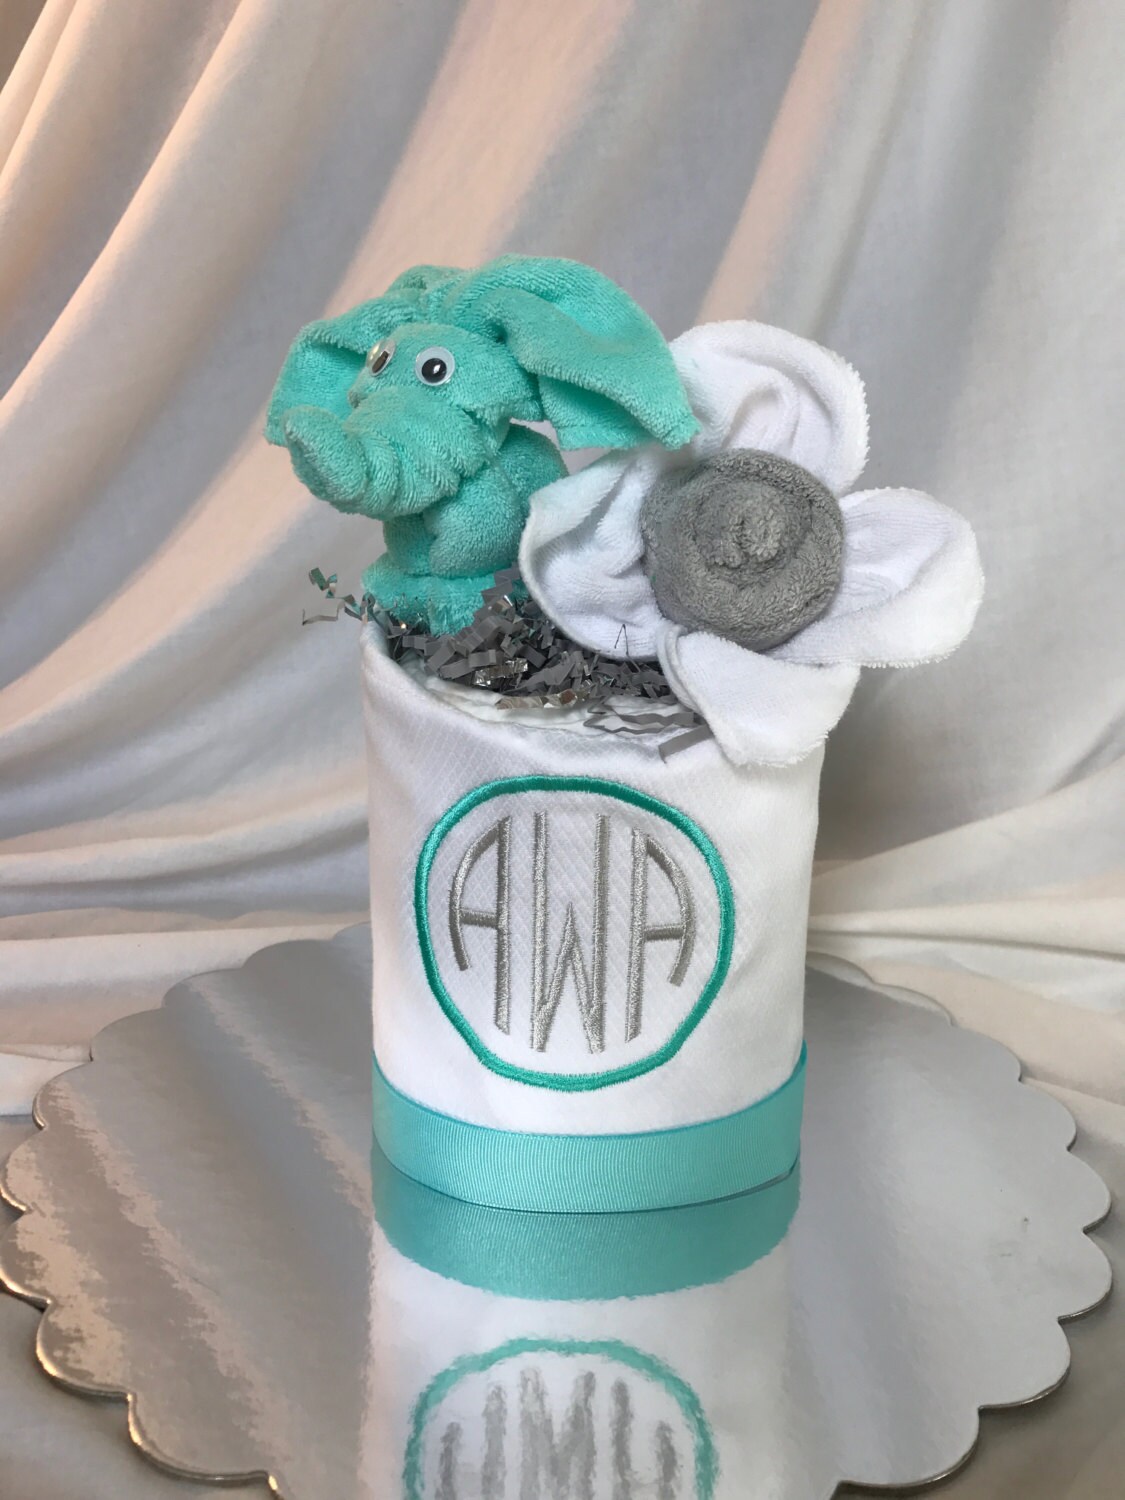 Mini Diaper Cake, Elephant Diaper Cake, Gender Neutral baby gift, Unique baby gift, monogrammed, baby shower gift, personalized baby gift